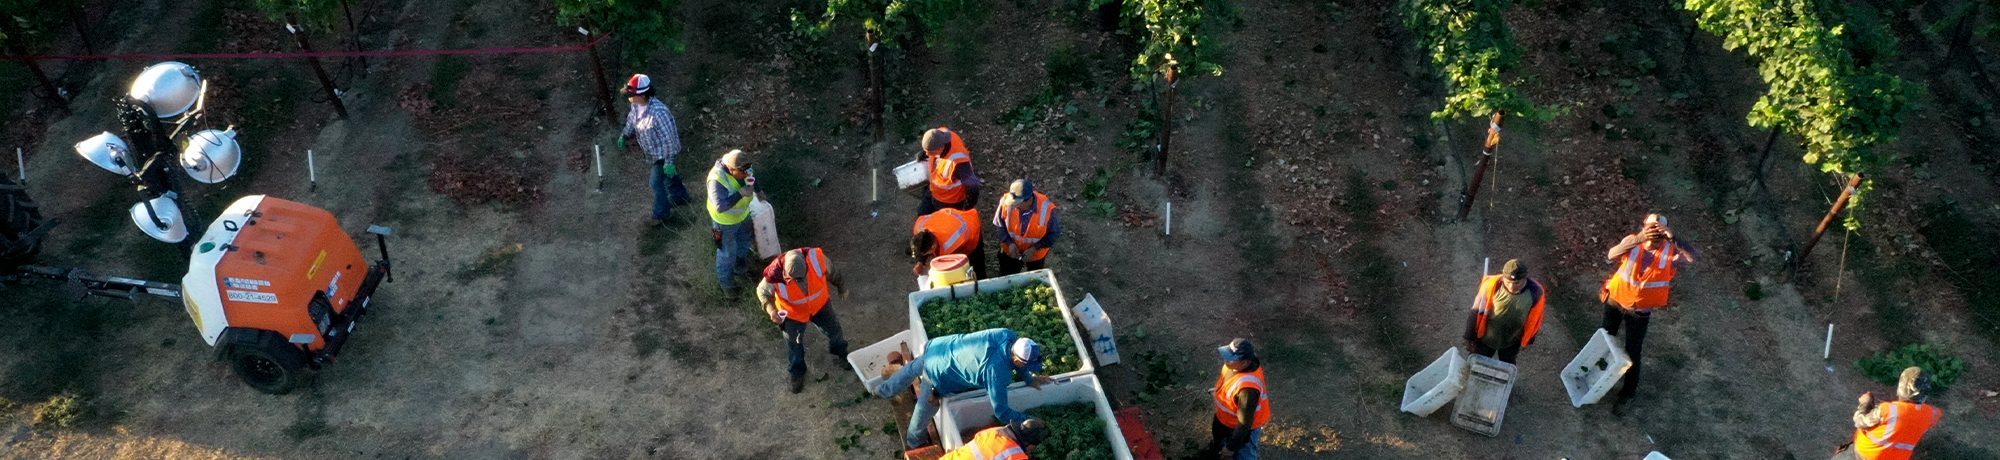 Aerial view of farmworkers and vehicles in a vineyard